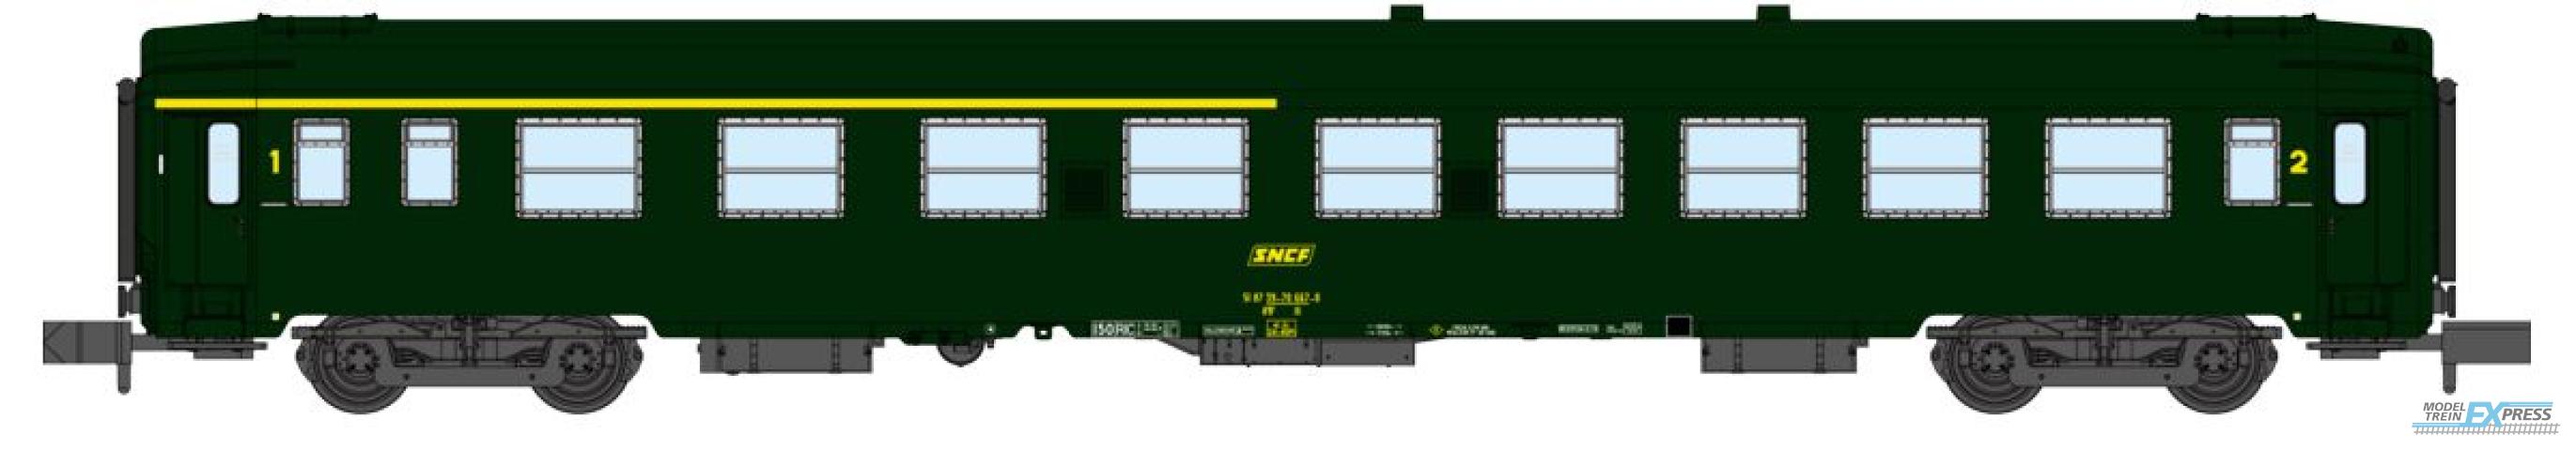 REE models NW-257 UIC Y coach, A4B5 green livery ,boxed SNCF Logo, Period IV